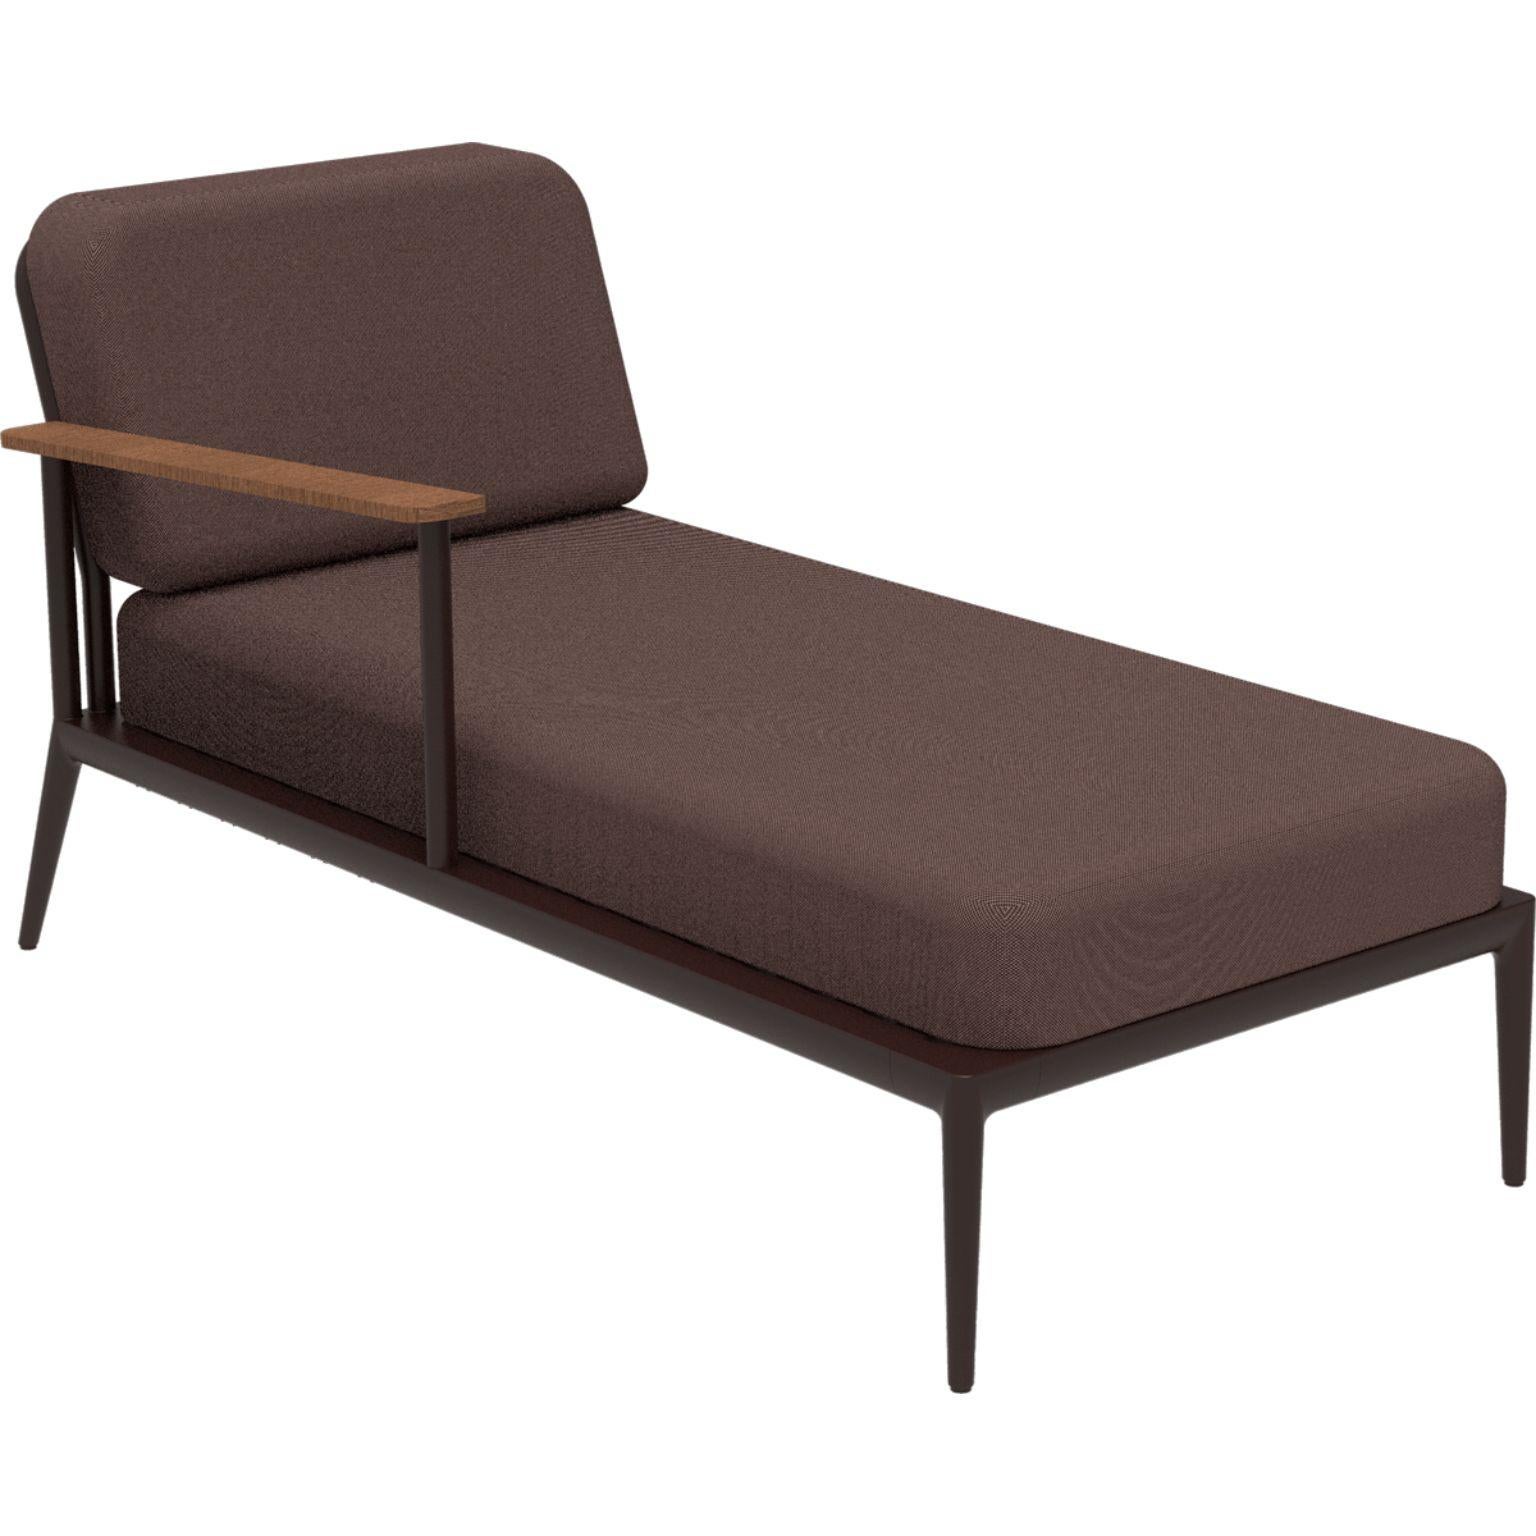 Nature Chocolate Right Chaise longue by MOWEE
Dimensions: D155 x W76 x H81 cm (seat height 42 cm).
Material: Aluminum, upholstery and Iroko Wood.
Weight: 28 kg.
Also available in different colors and finishes.

An unmistakable collection for